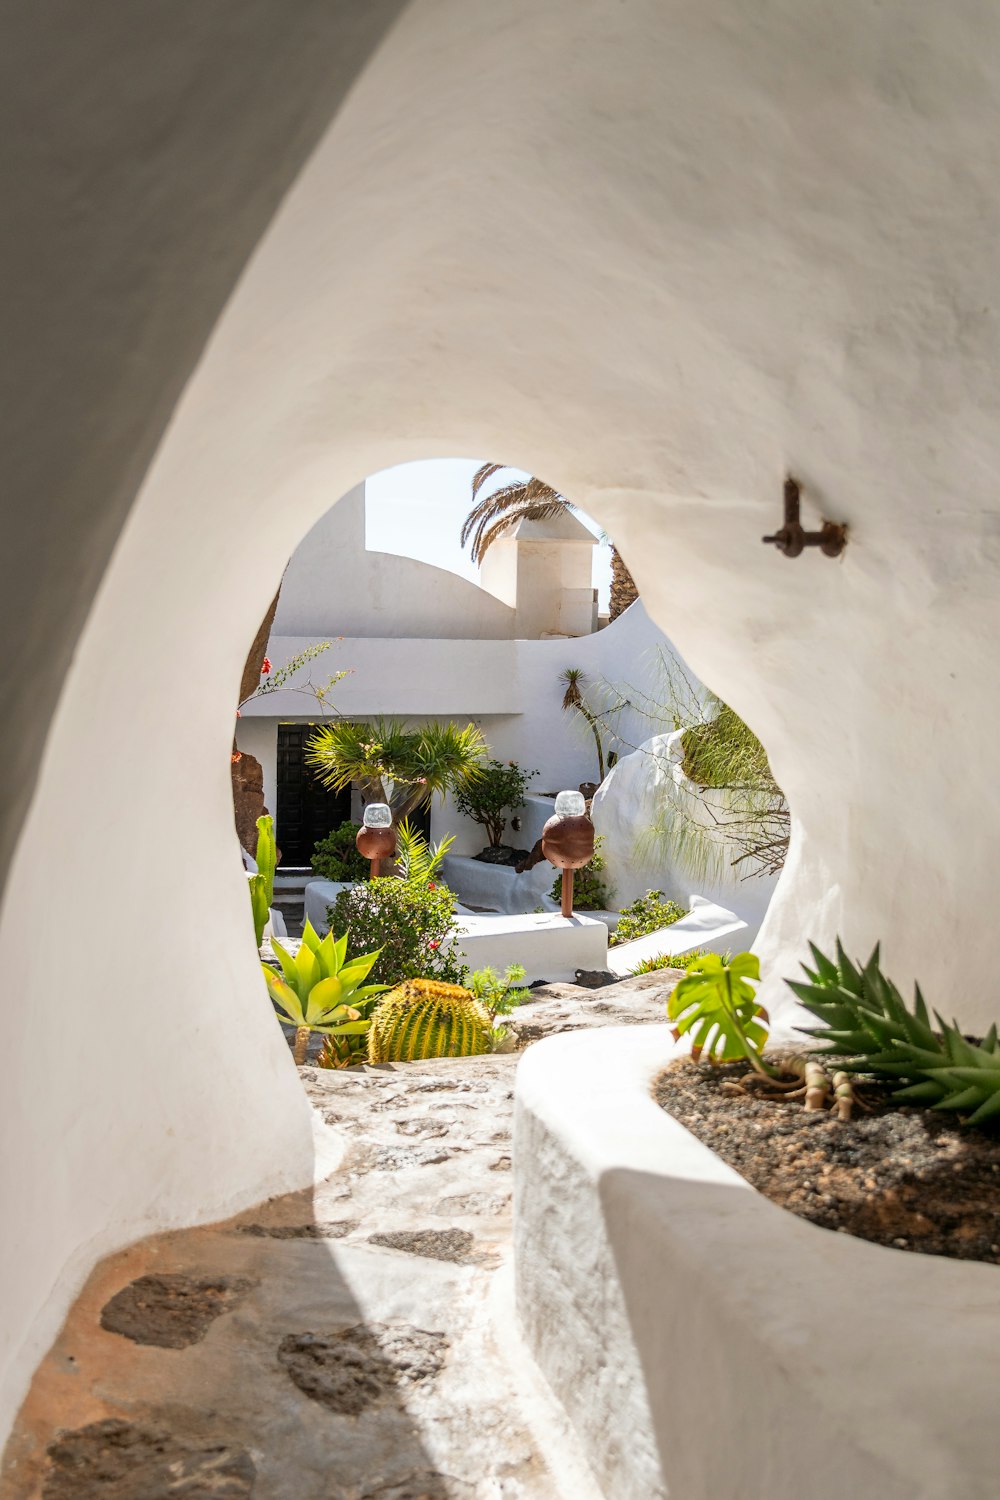 a view of a white building through an archway